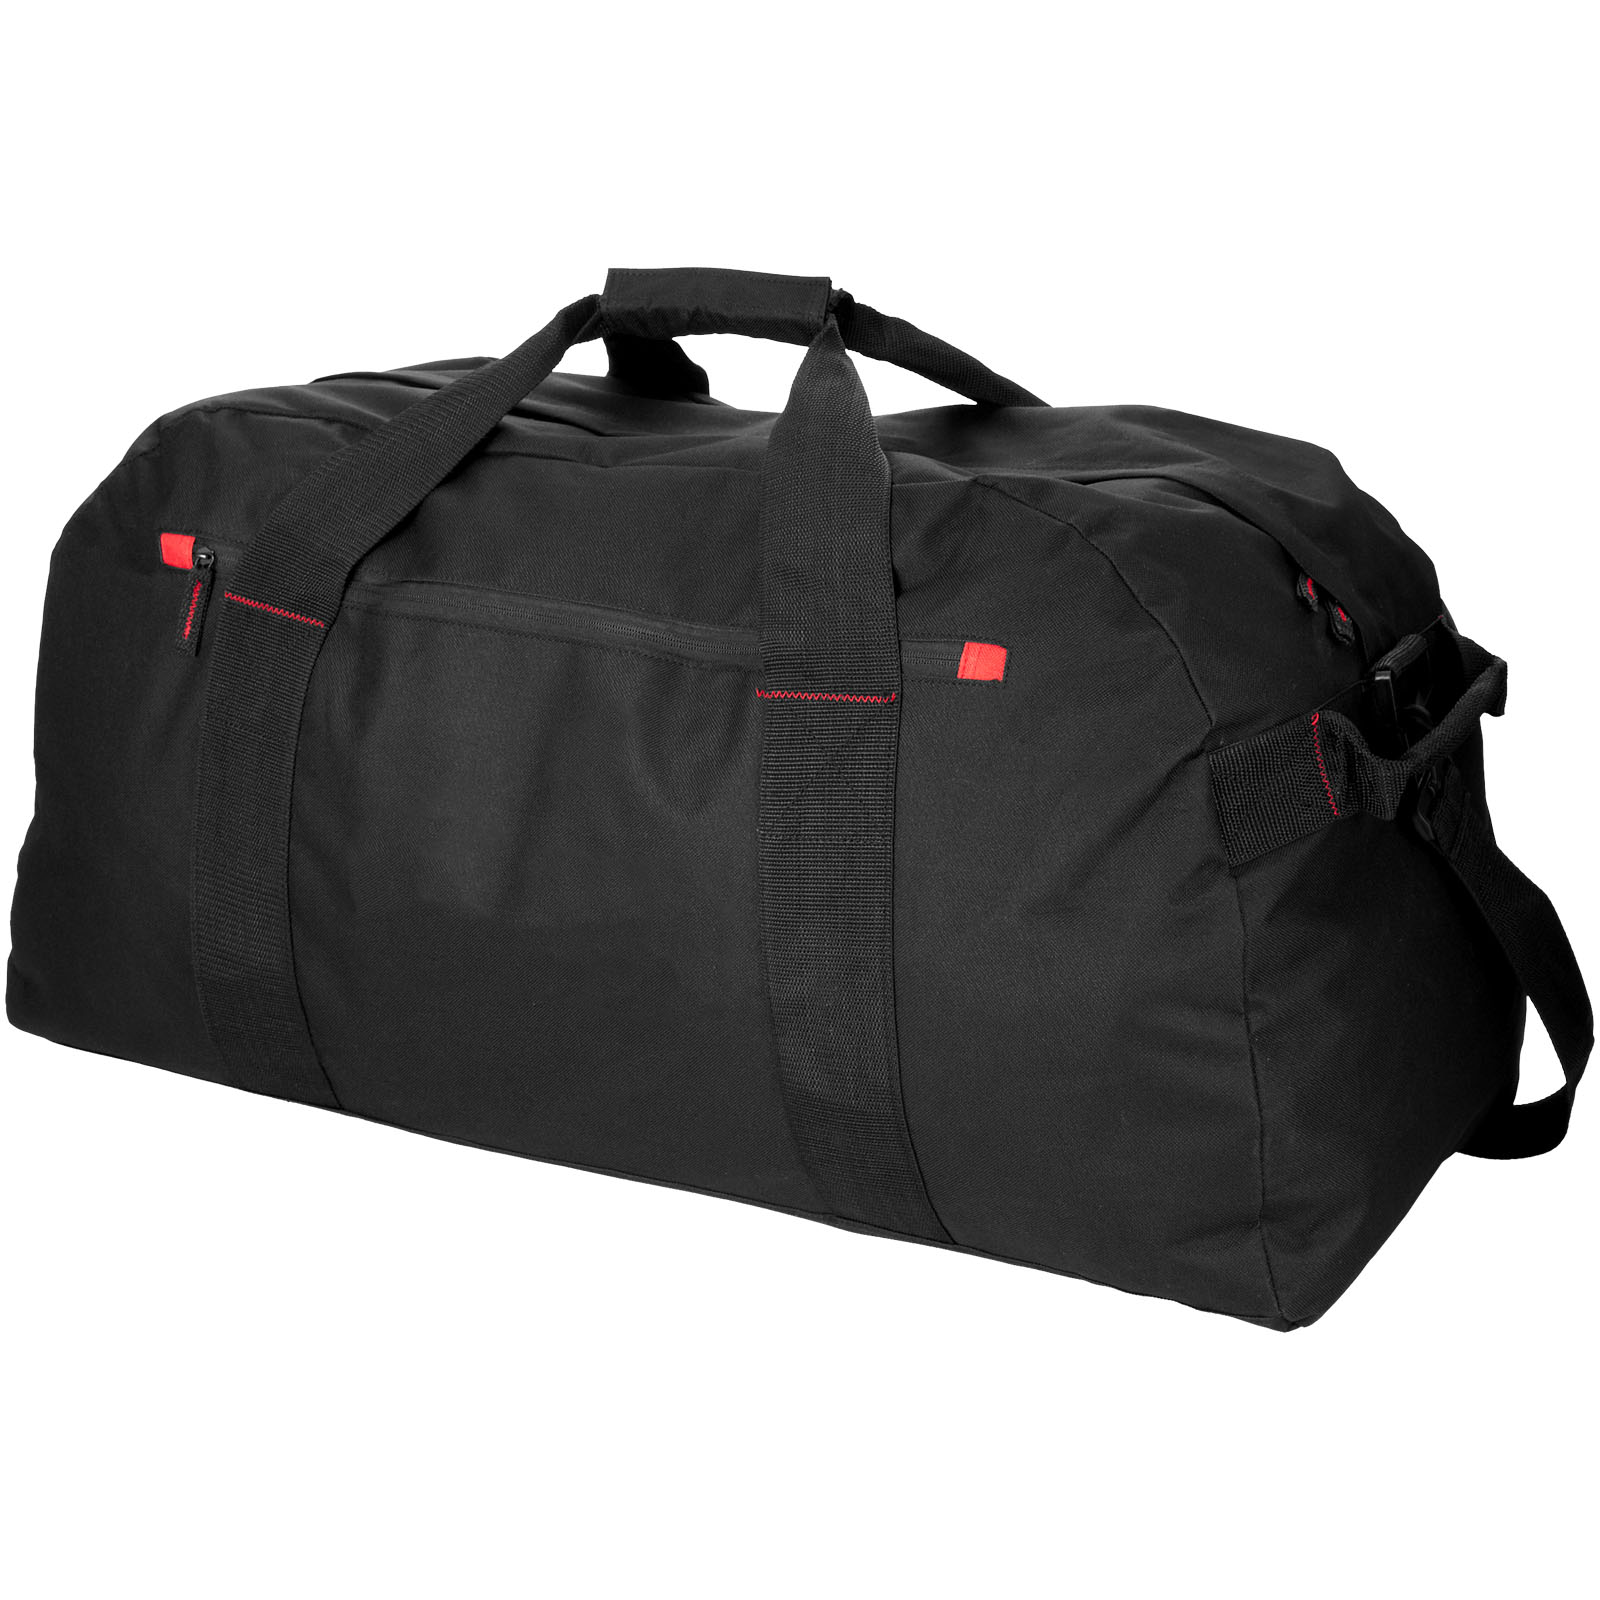 Advertising Sport & Gym bags - Vancouver extra large travel duffel bag 75L - 0